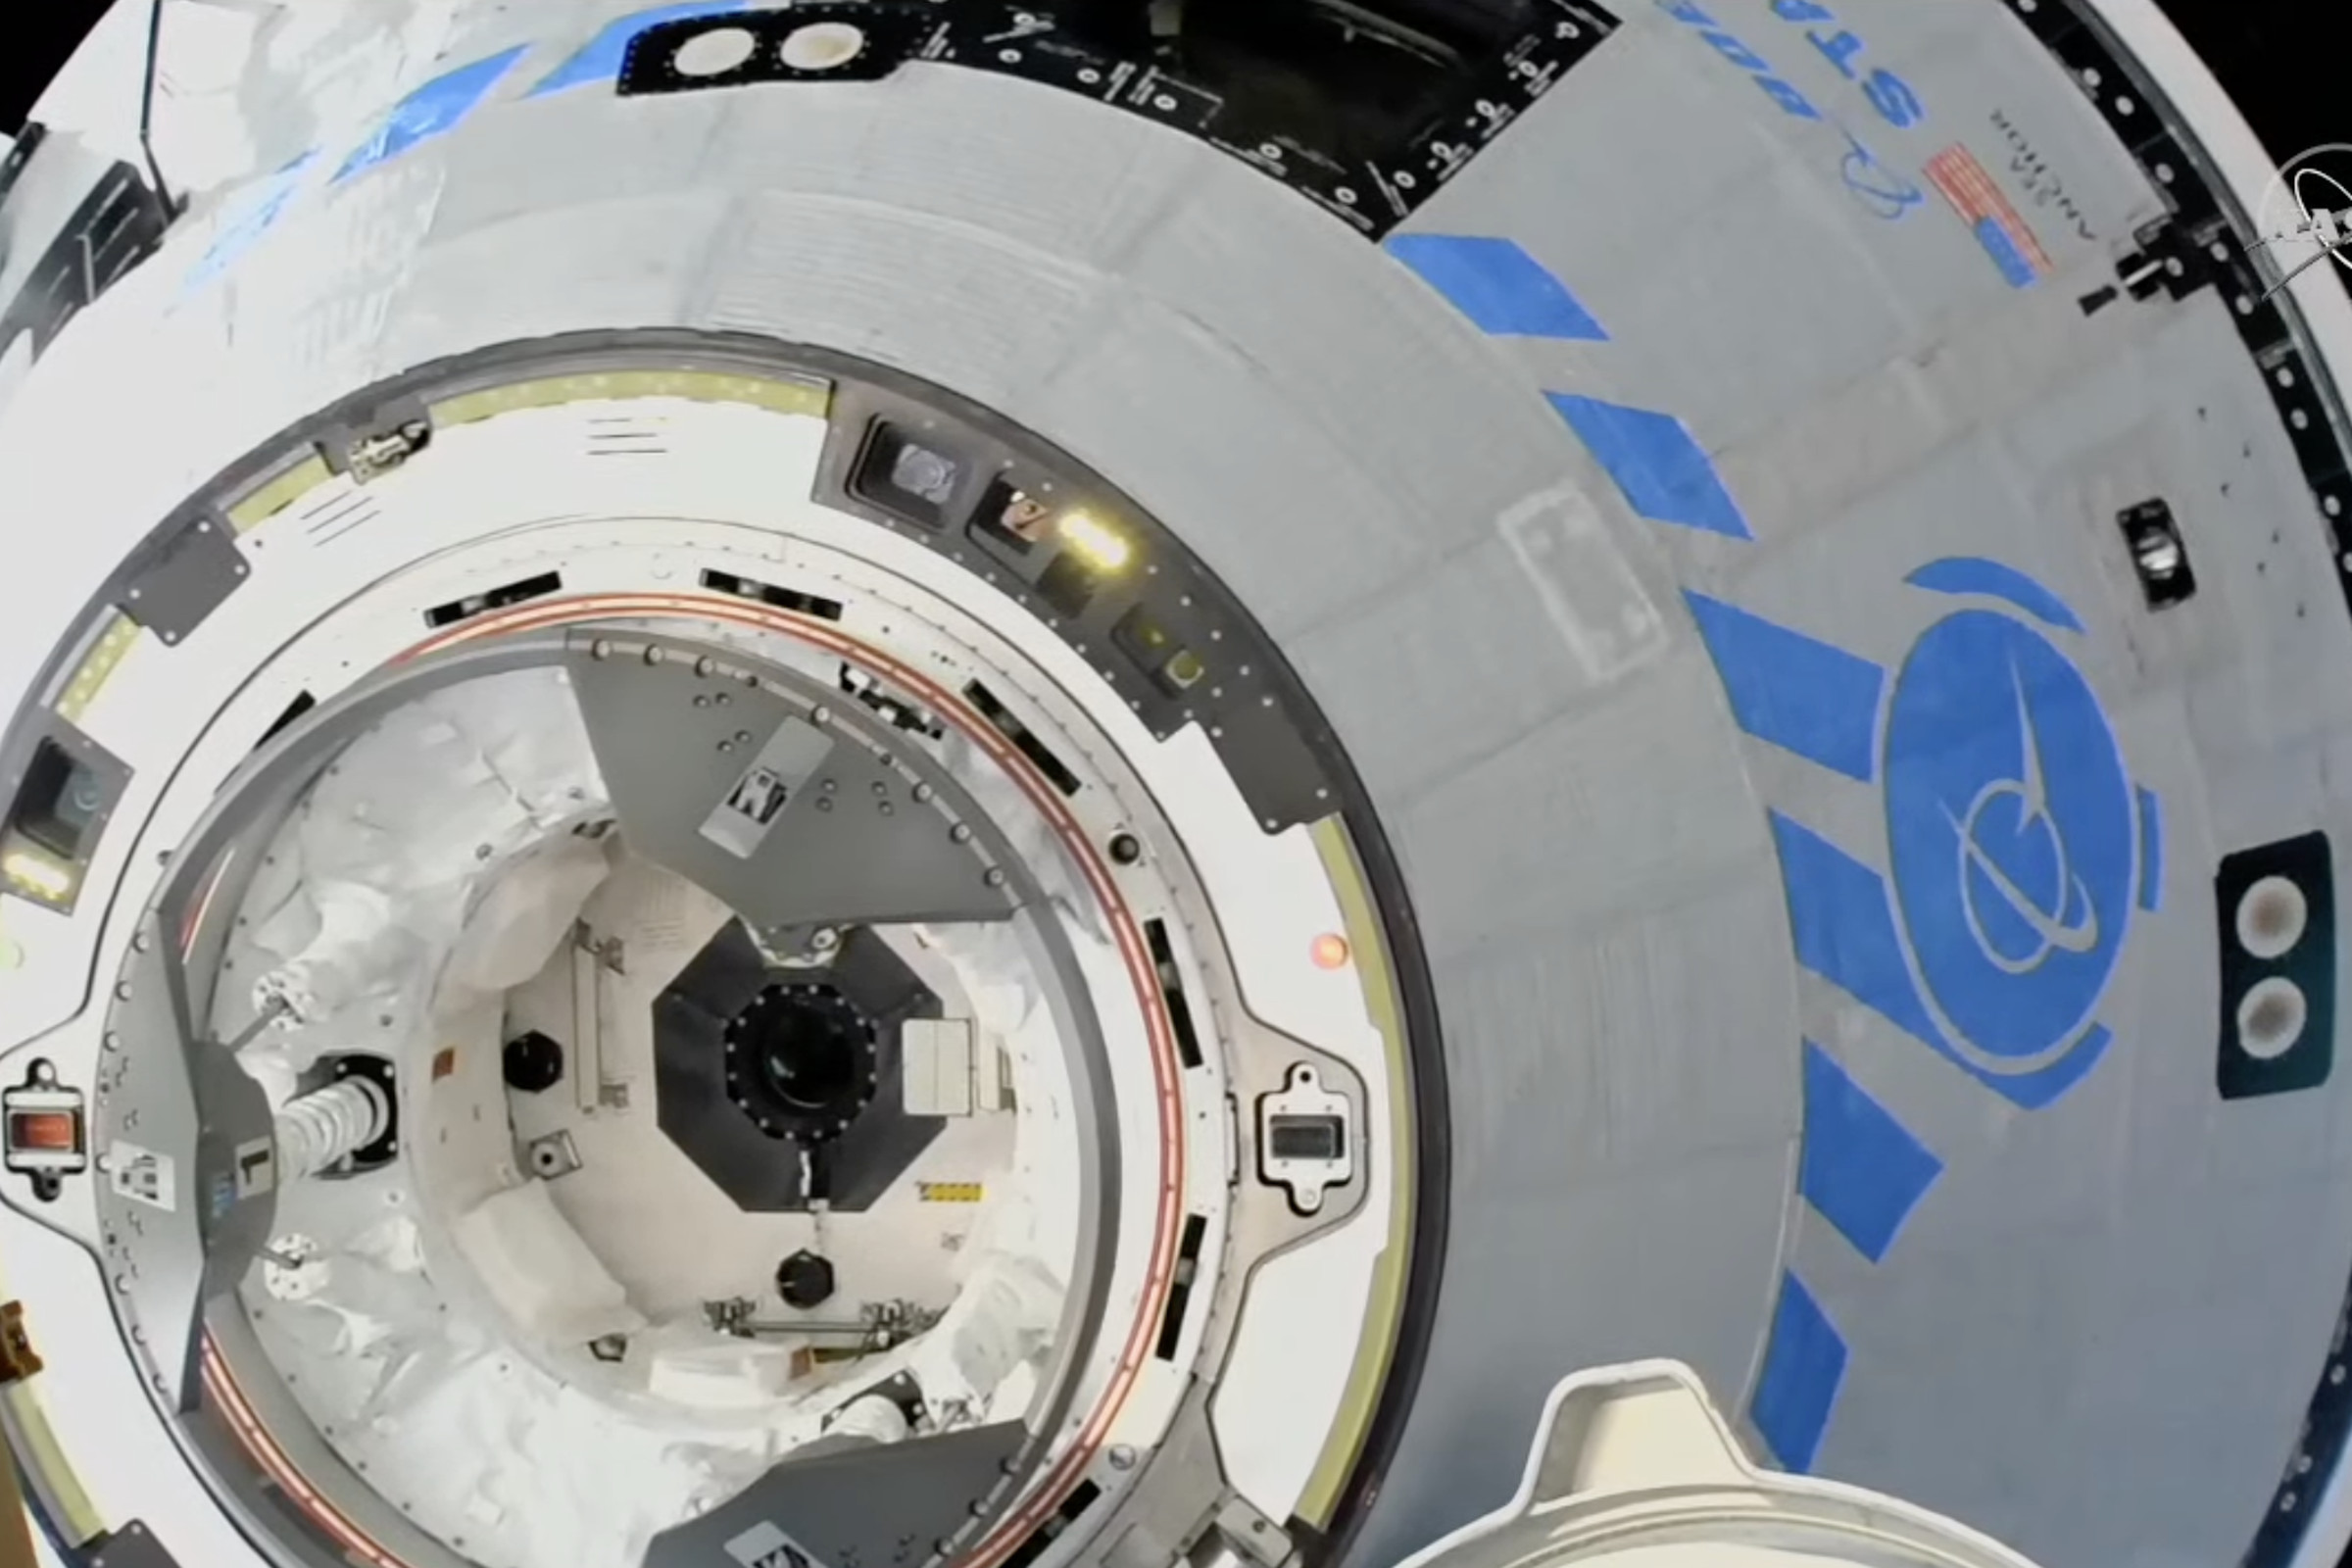 Boeing’s Starliner coming in for docking, as seen from the International Space Station